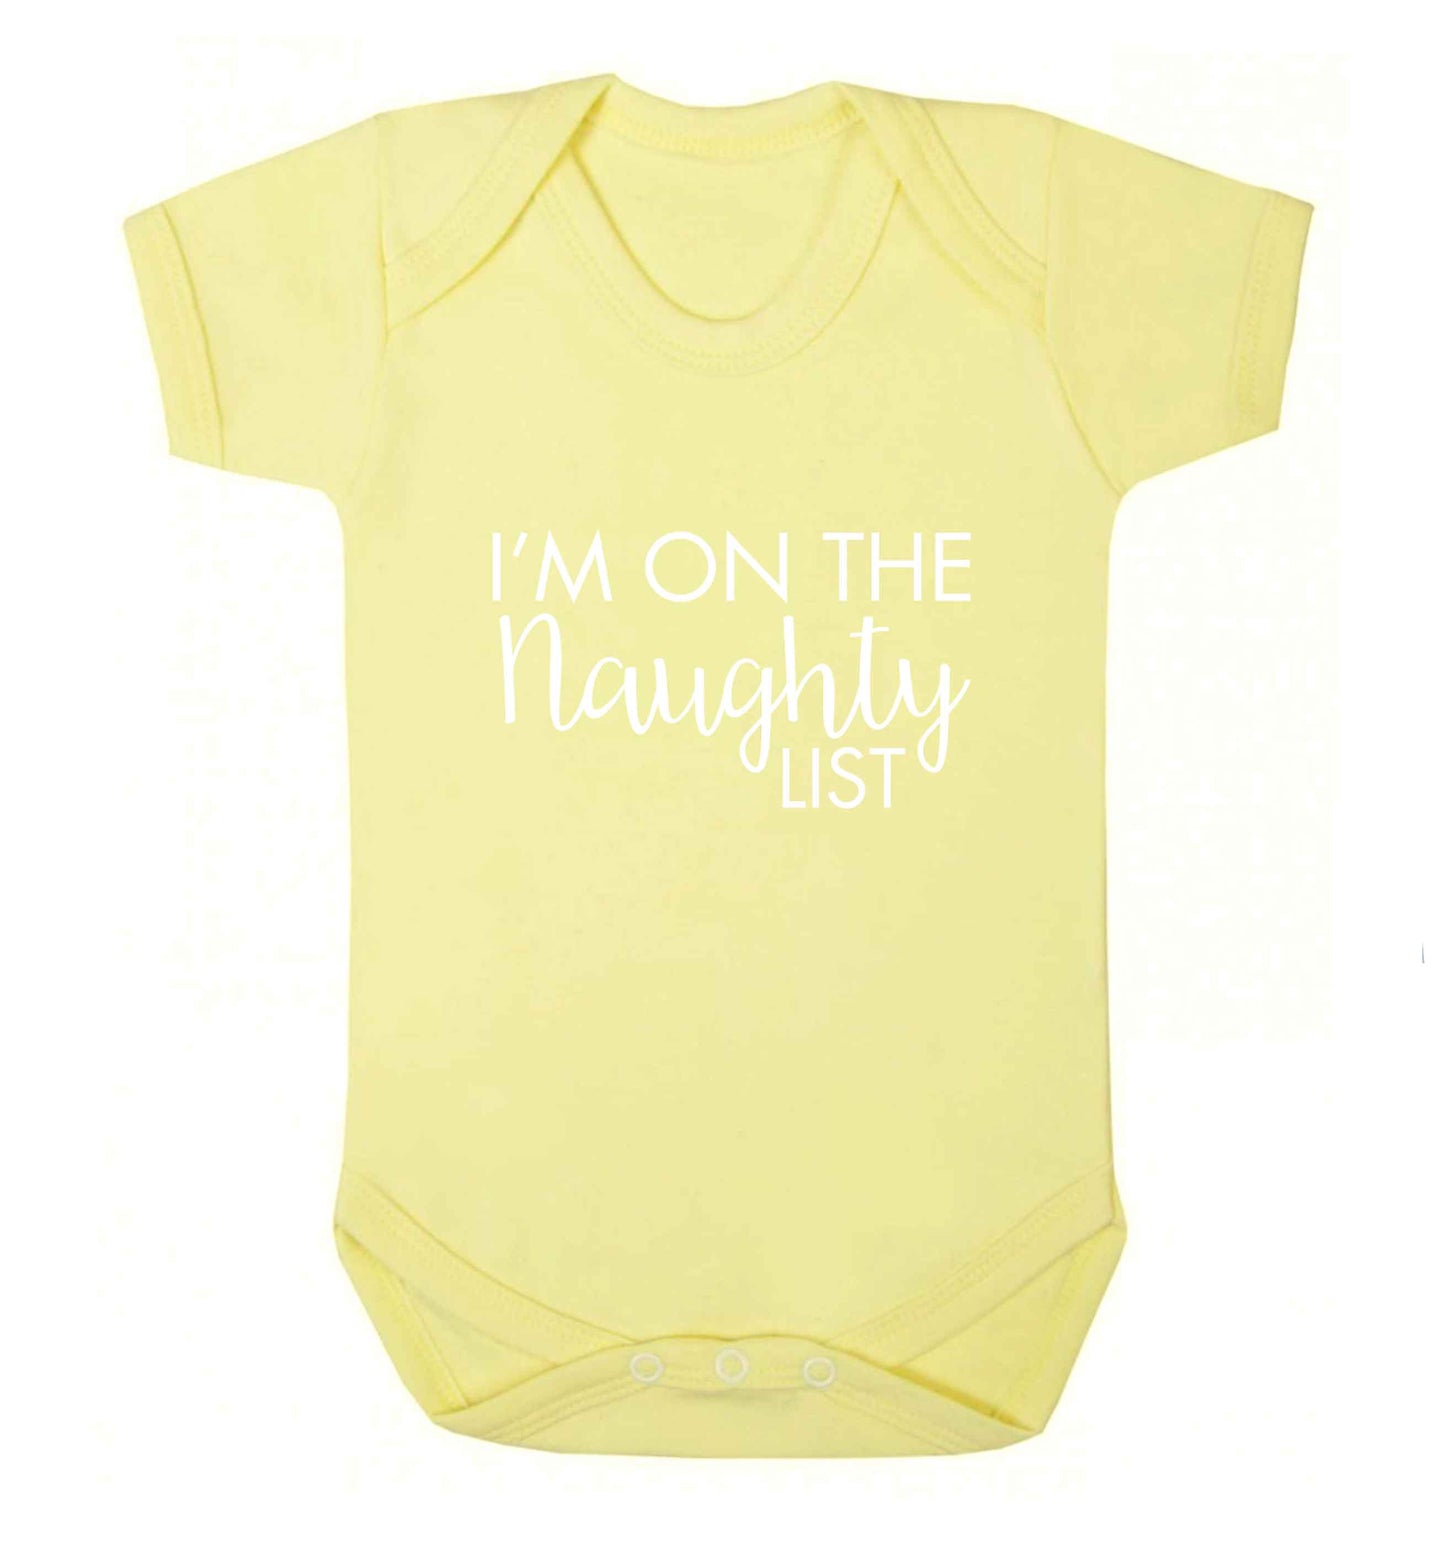 I'm on the naughty list baby vest pale yellow 18-24 months